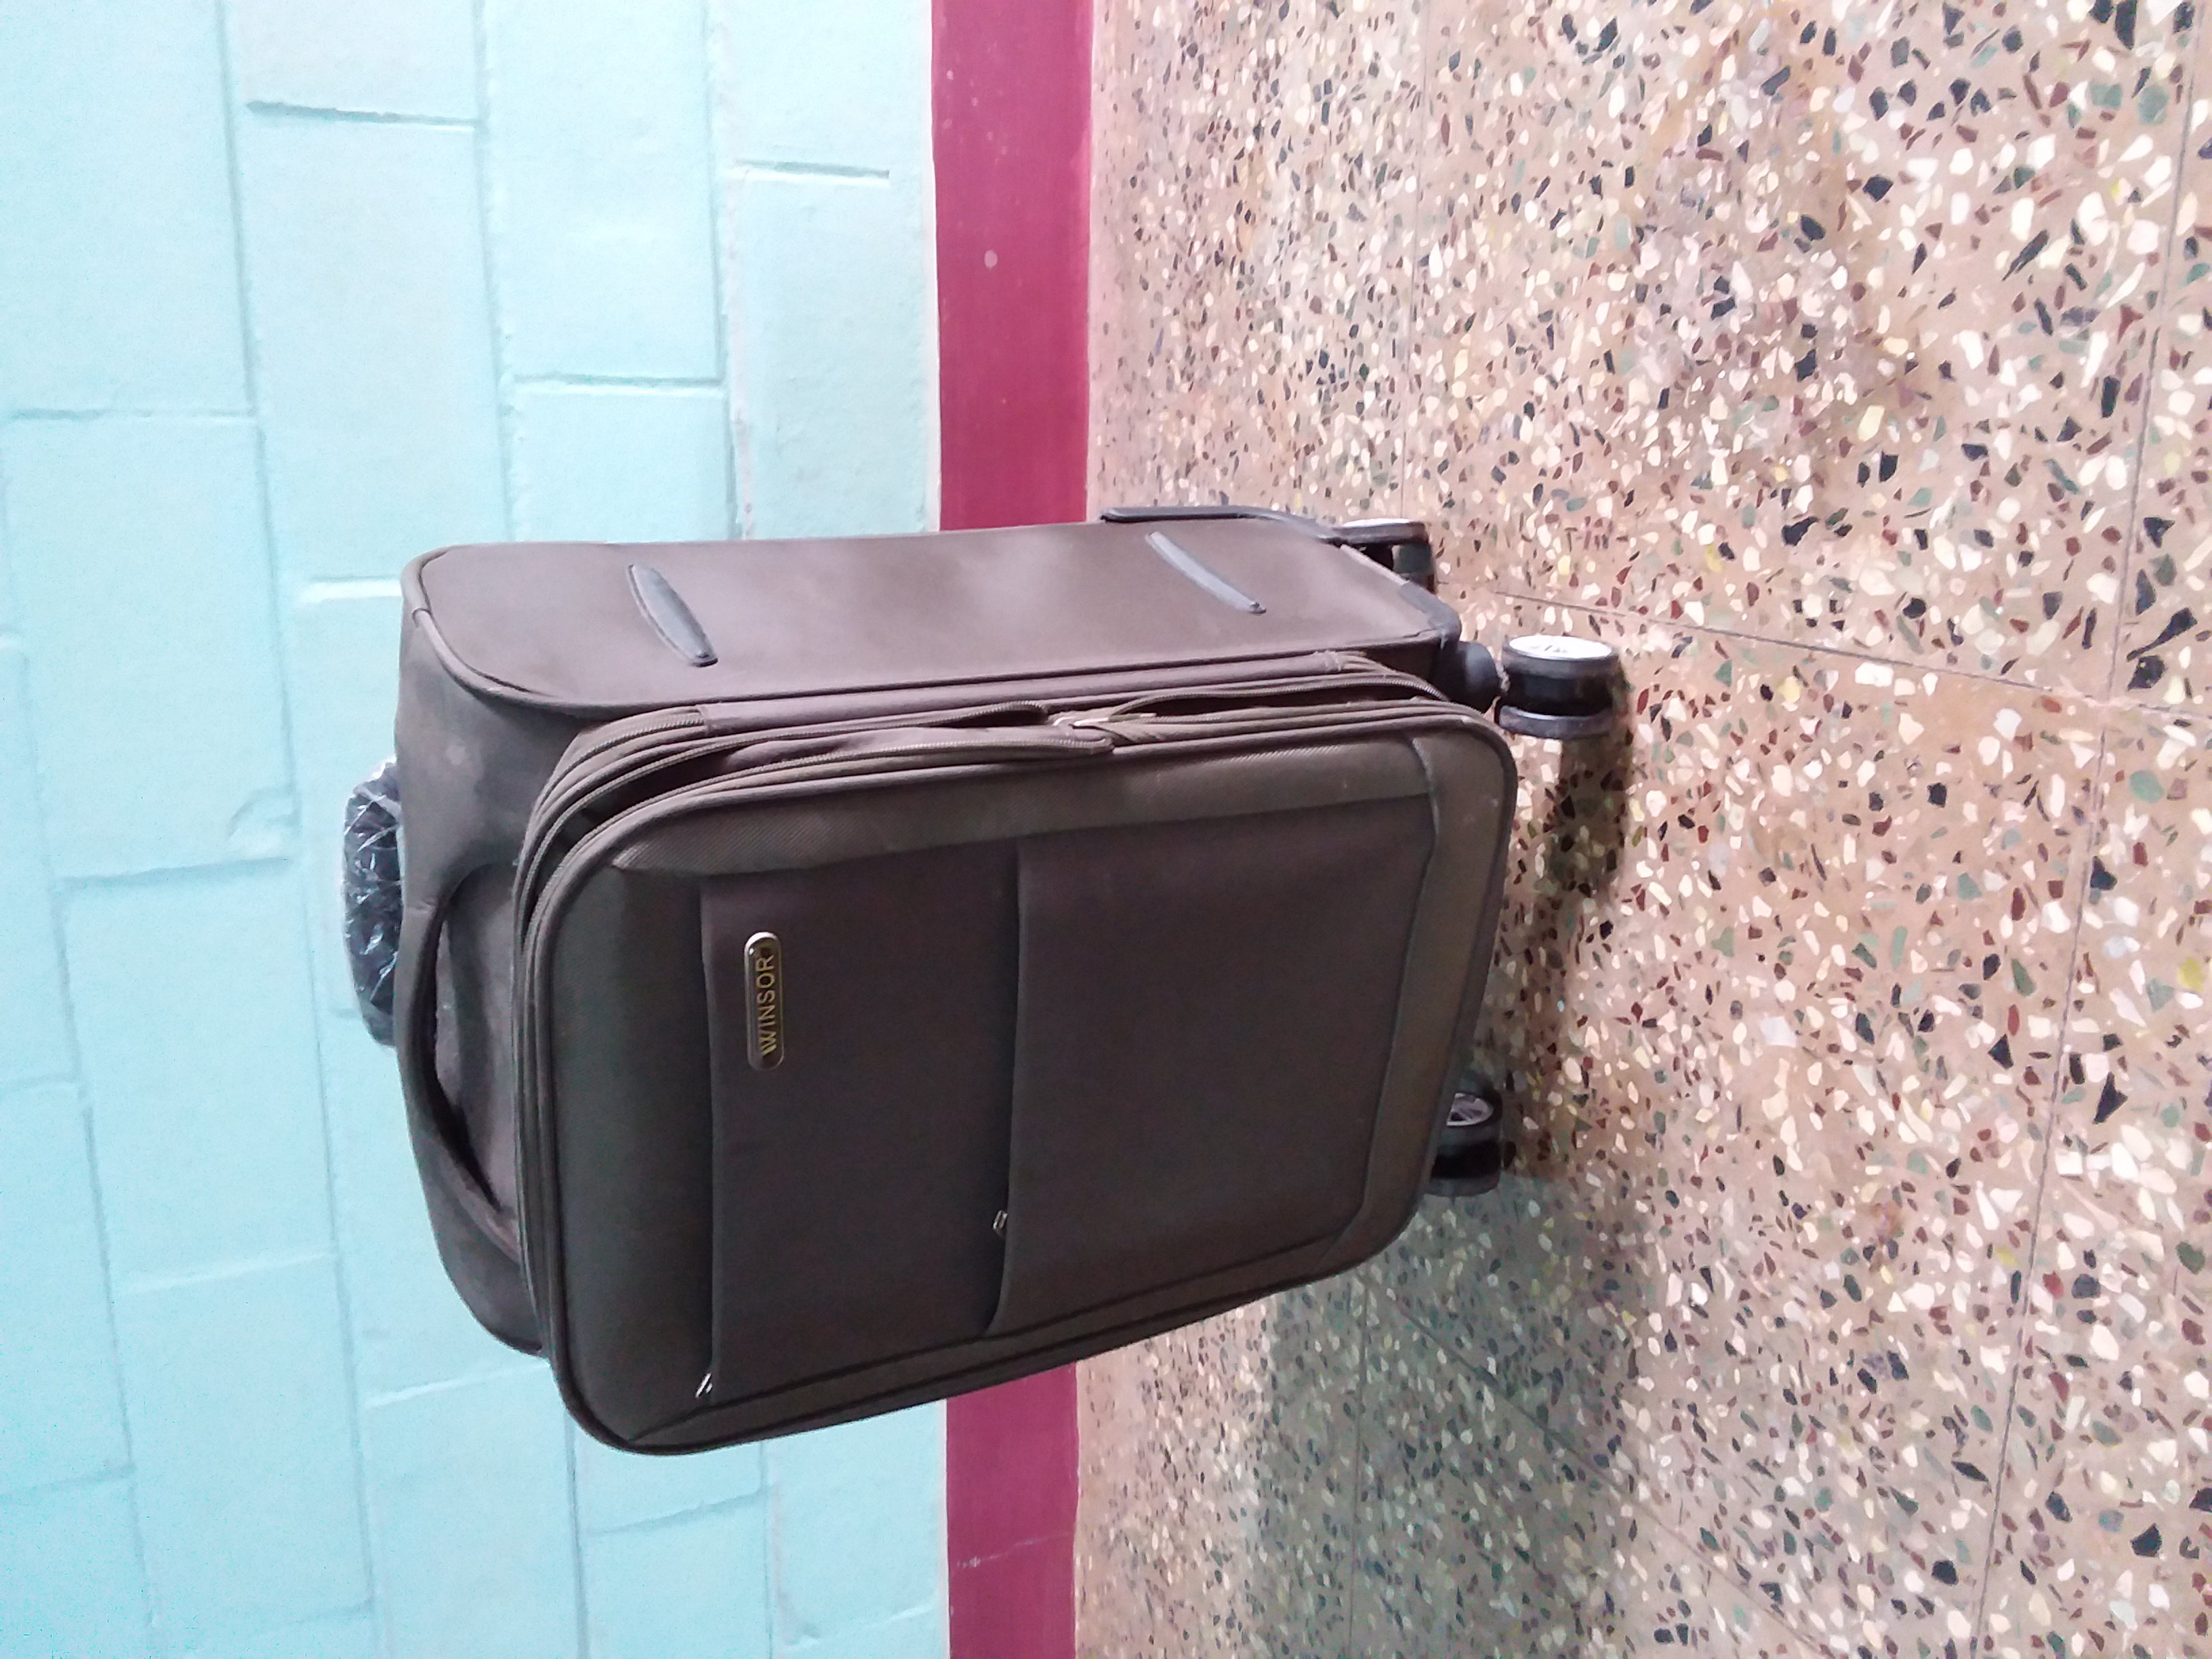 Shivali Luggage in Bhagal,Surat - Best Bag Manufacturers in Surat - Justdial